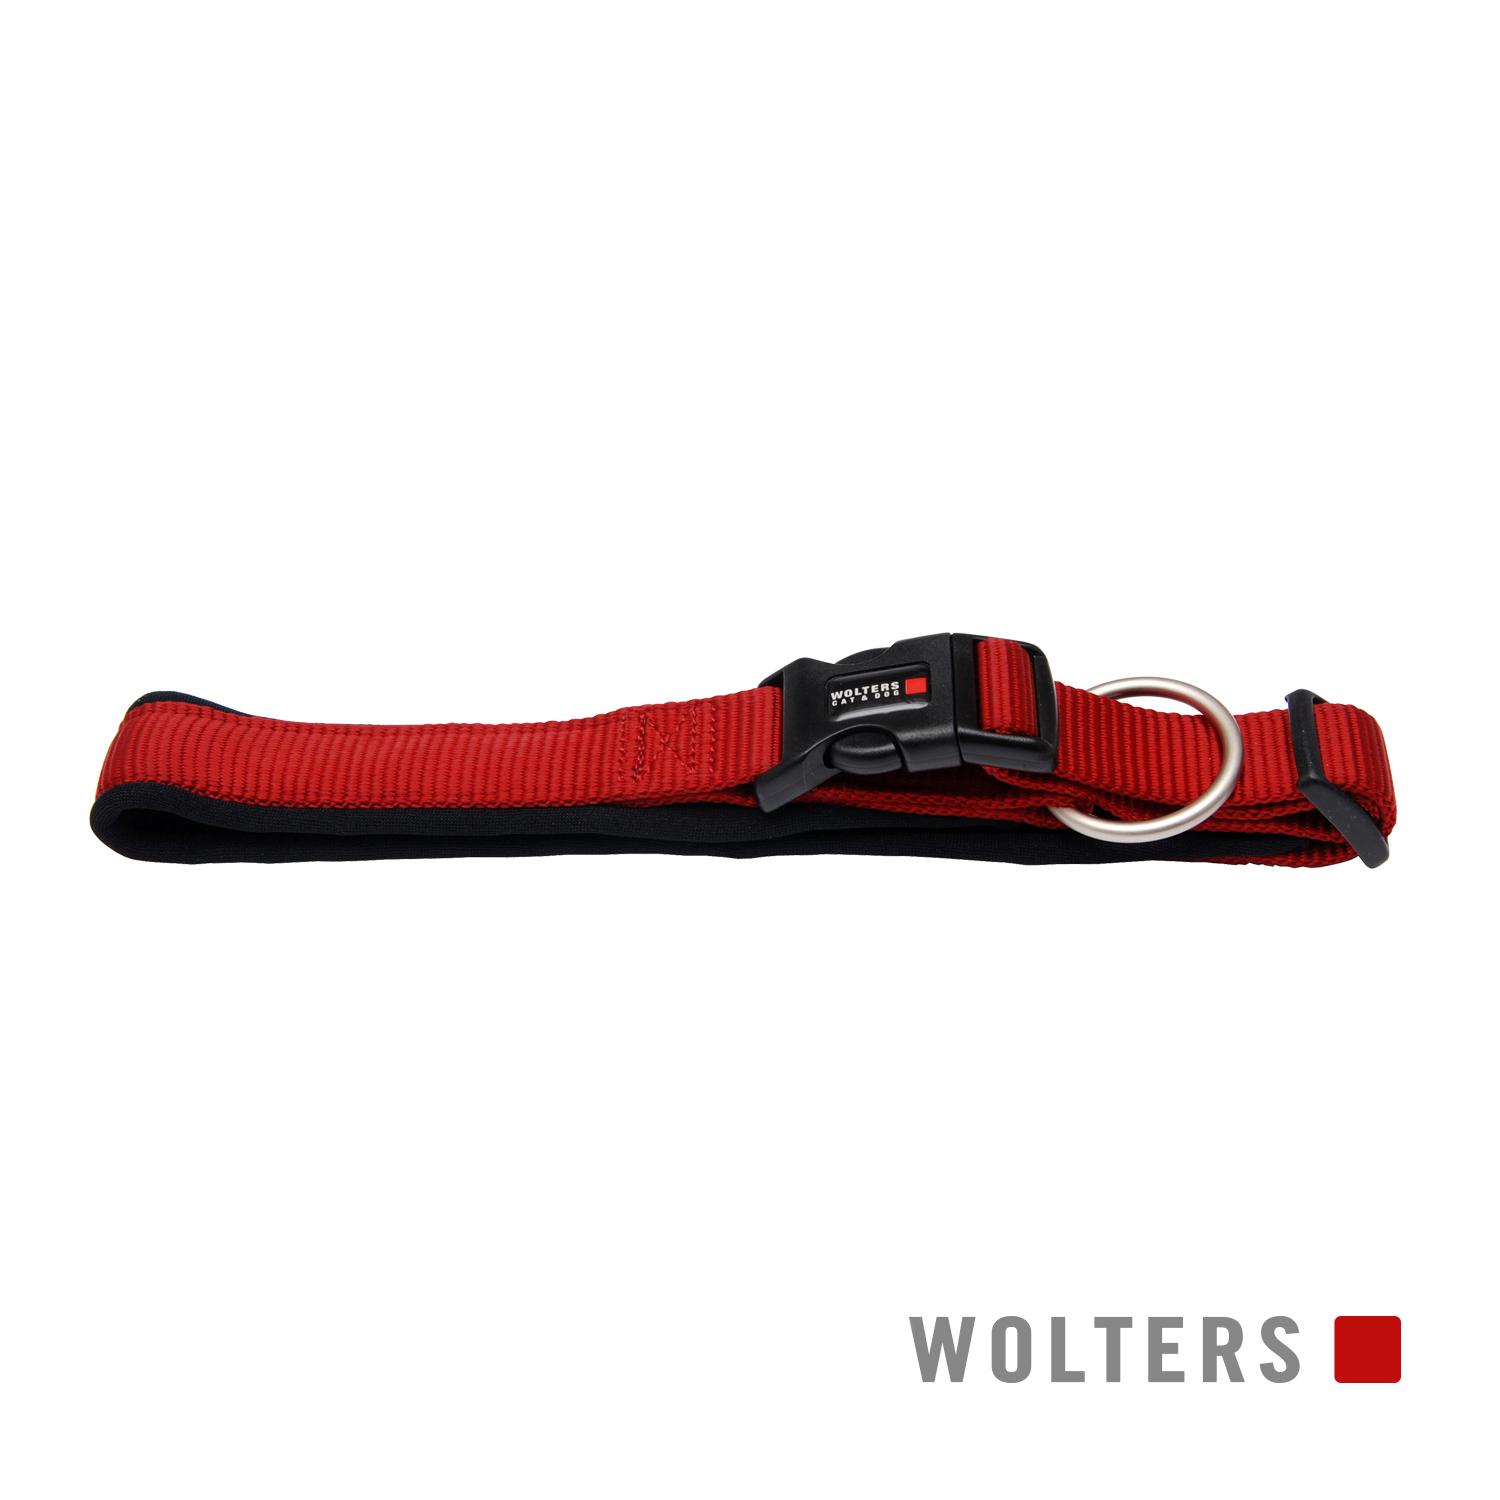 Wolters Halsband Professional Comfort Rot/Schwarz 20-24cm x 15mm